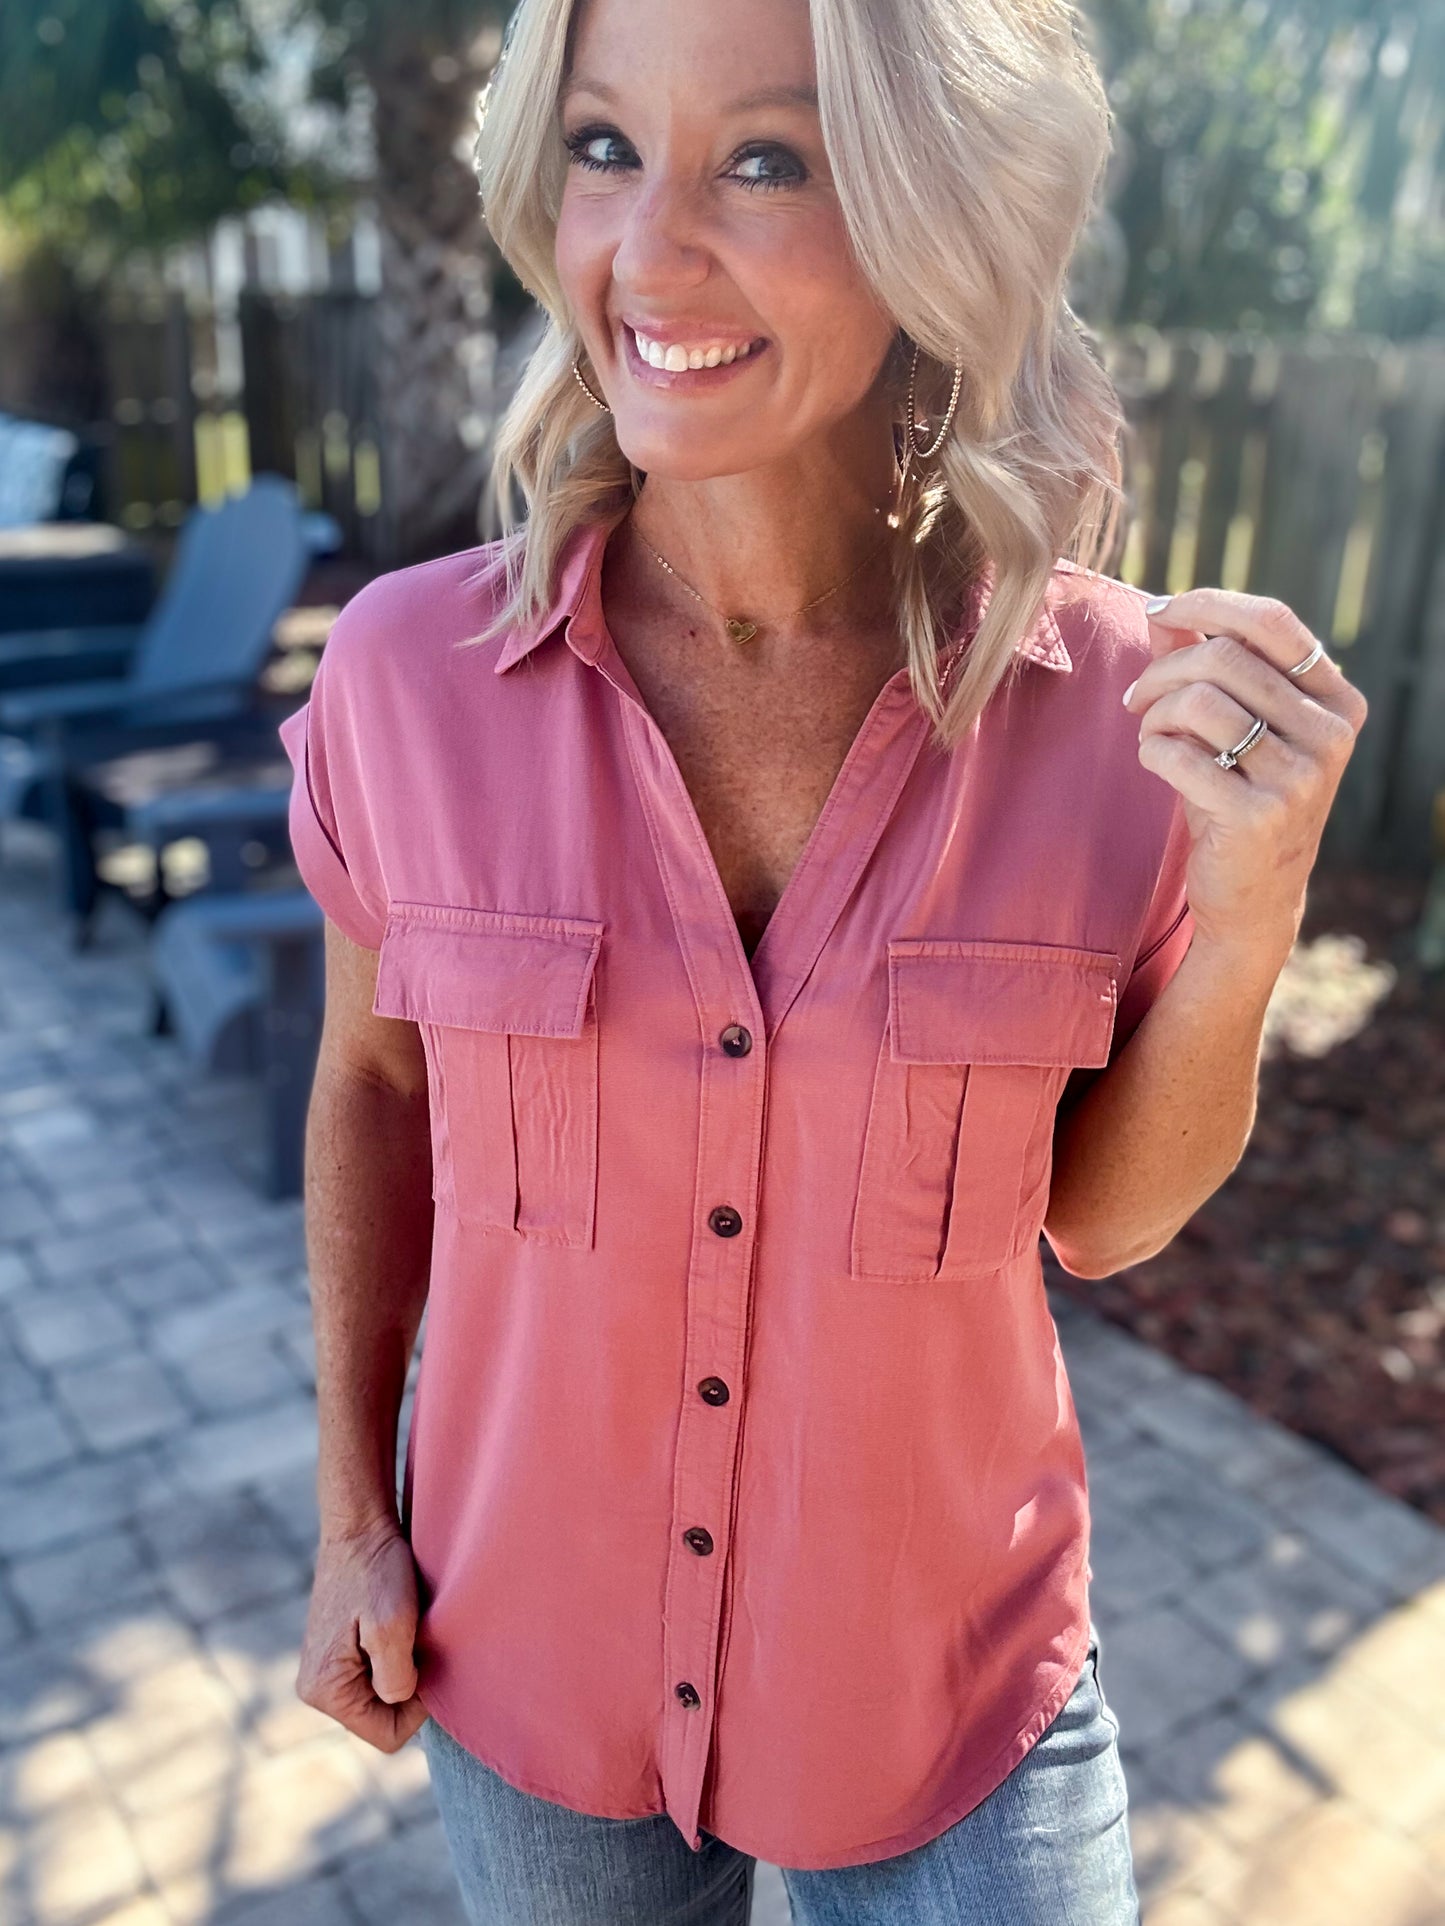 The 9-5 Workday Button Up Top